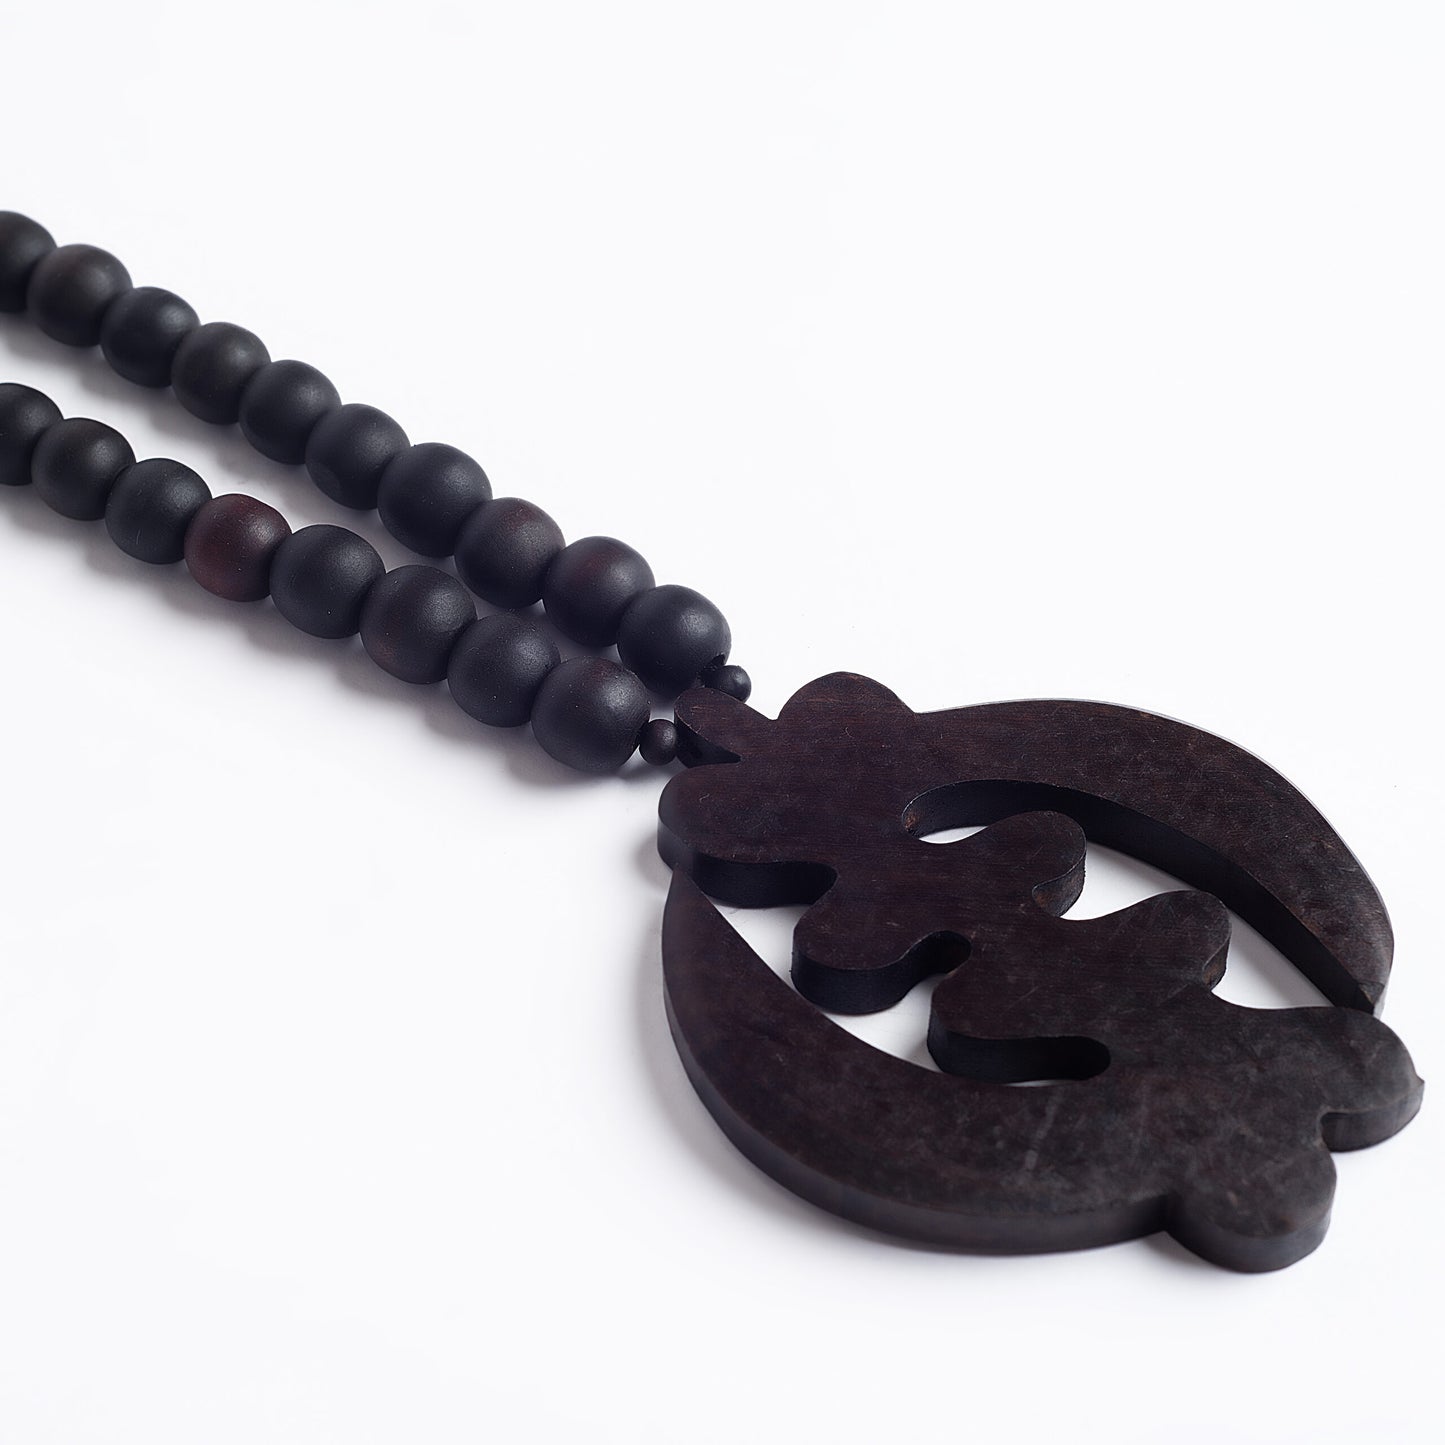 Gye Nyame "Except For God" Necklace